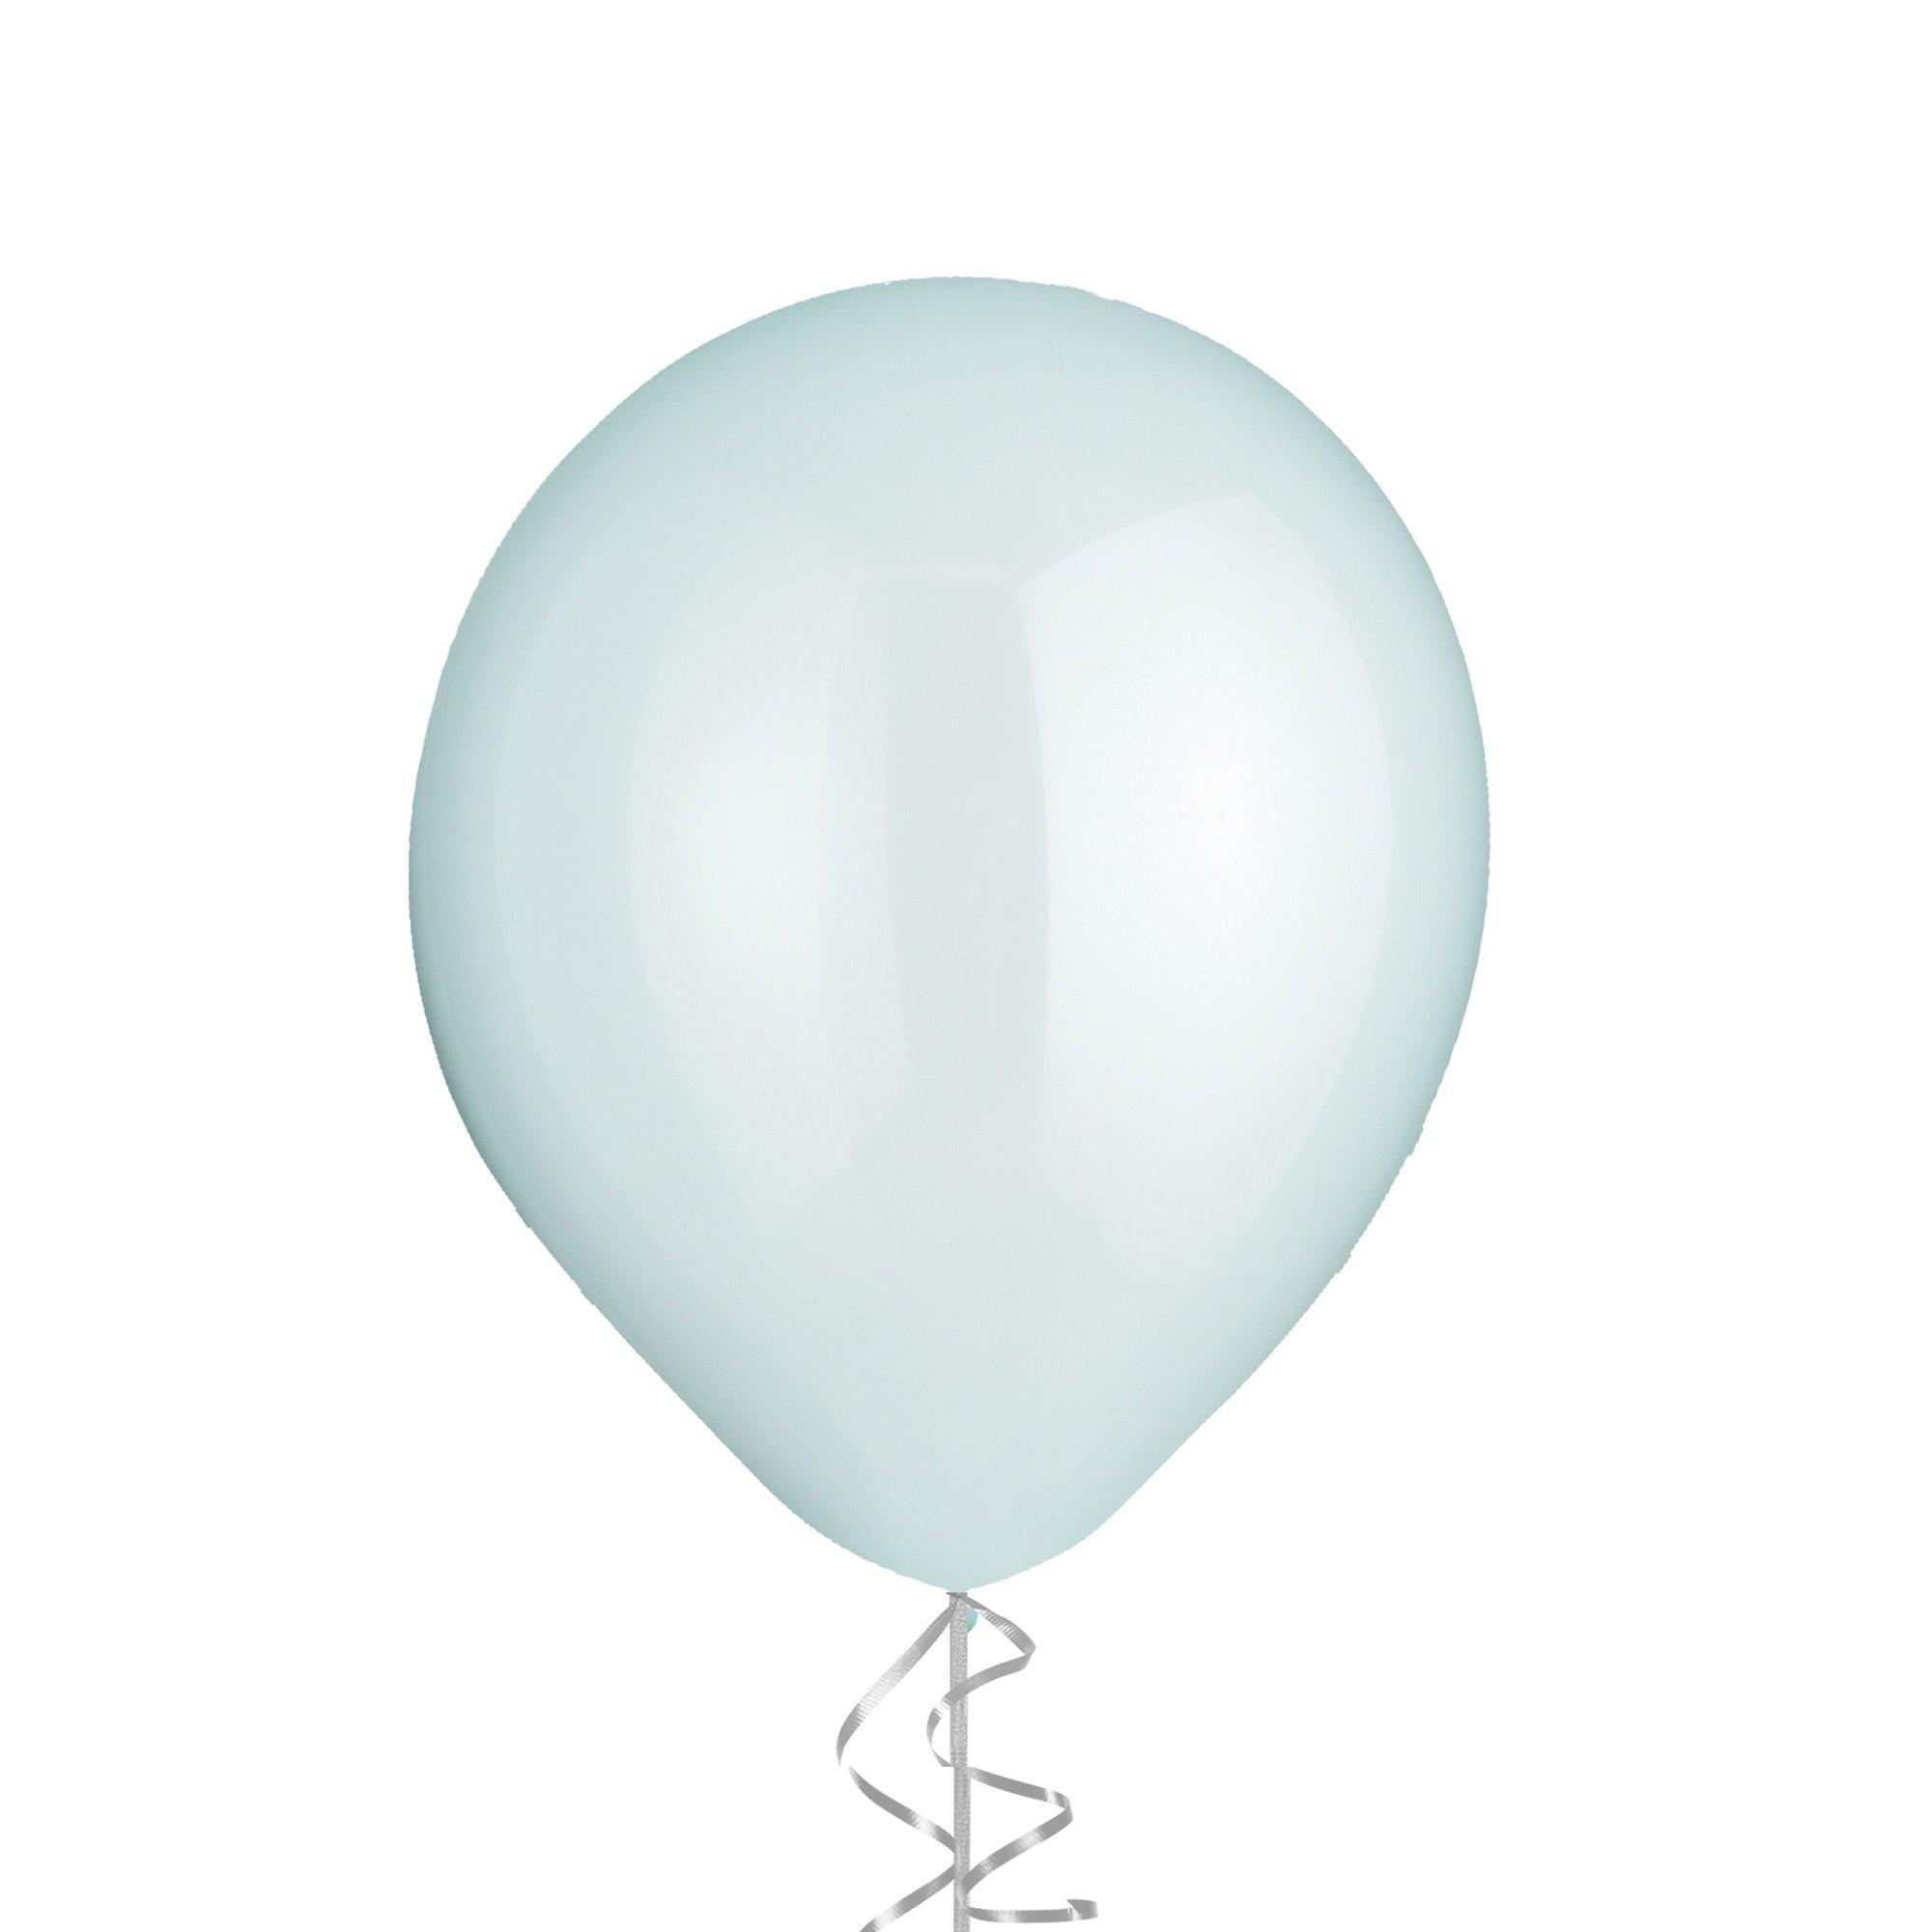 1ct, 12in, Clear Latex Balloon